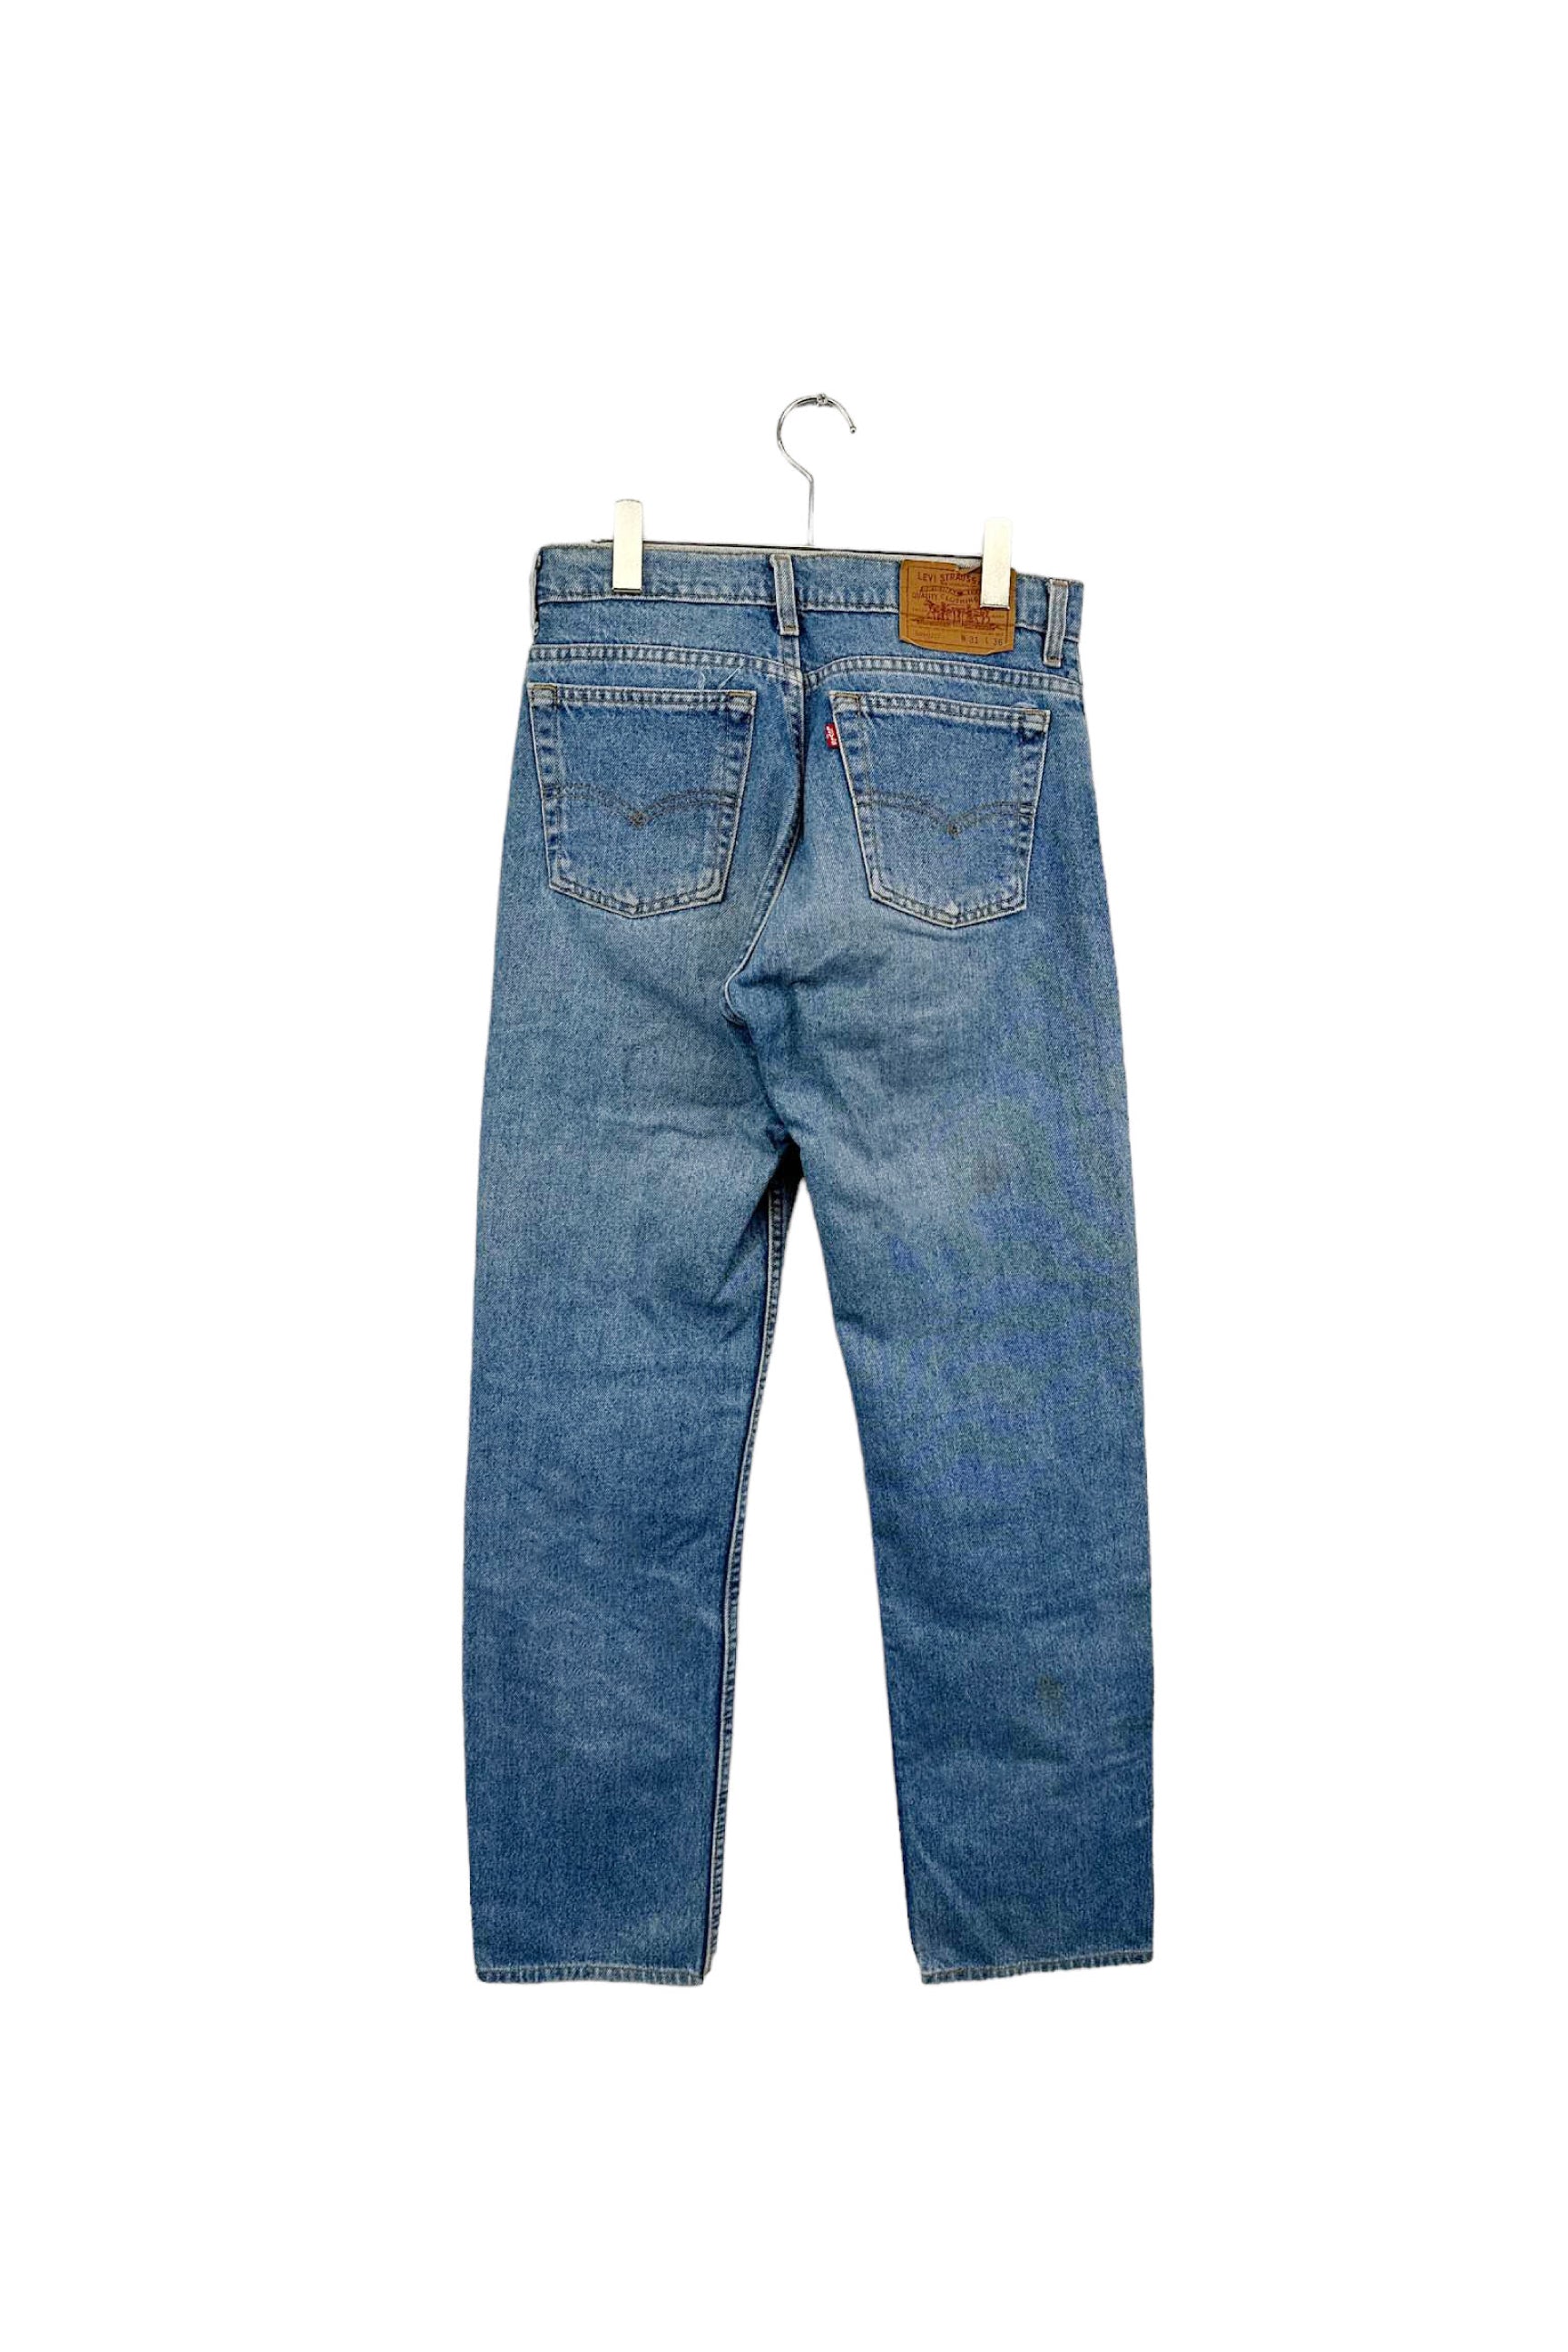 90's Made in USA Levi's 505-0217 denim pants – ReSCOUNT STORE